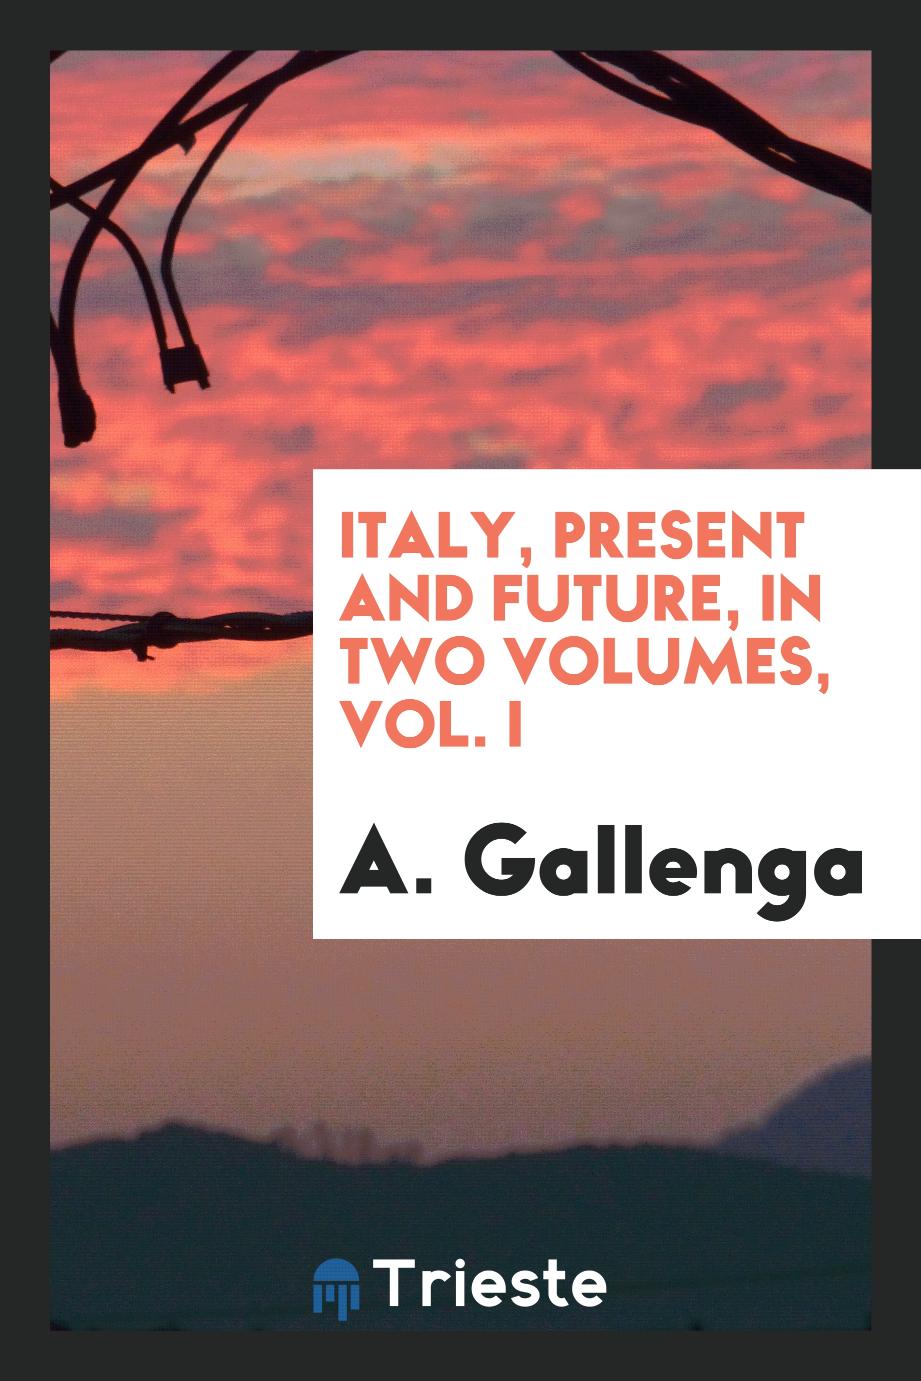 Italy, present and future, in two volumes, Vol. I